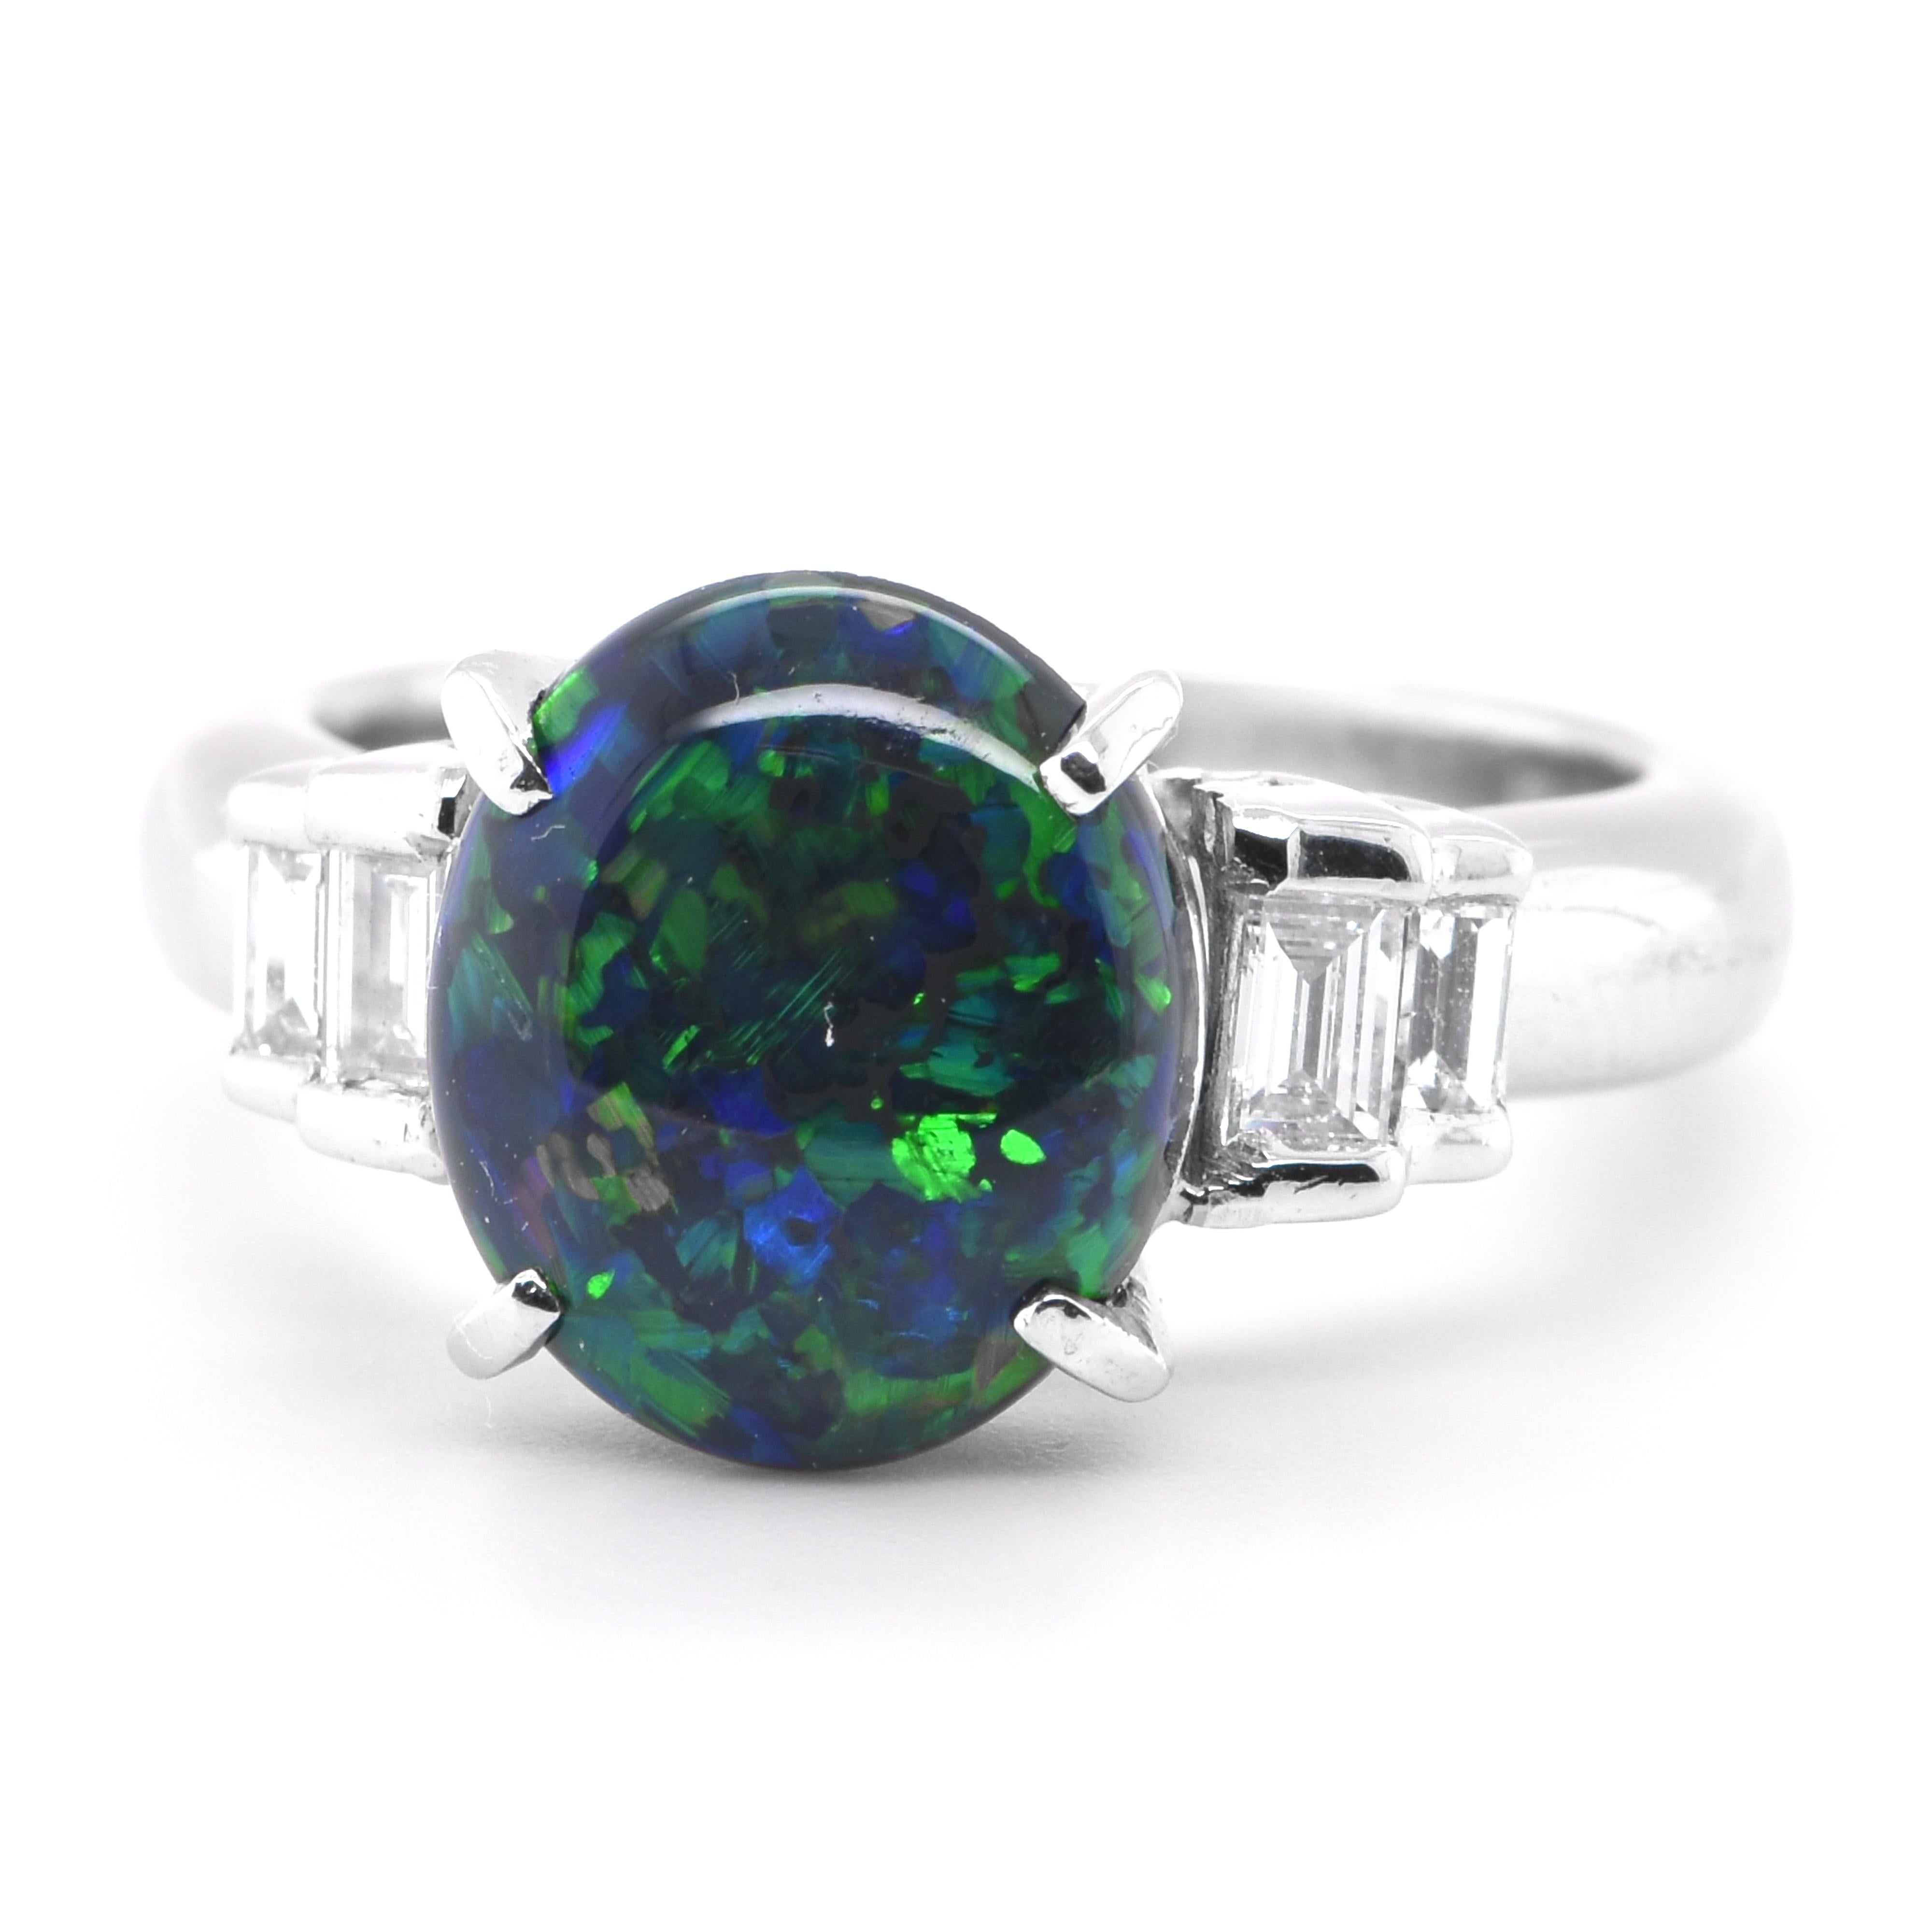 A beautiful three-stone ring featuring a 2.16 Carat, Natural, Australian Black Opal and 0.25 Carats of Diamond Accents set in Platinum. The Opal displays very good play of color! Opals are known for exhibiting flashes of rainbow colors known as